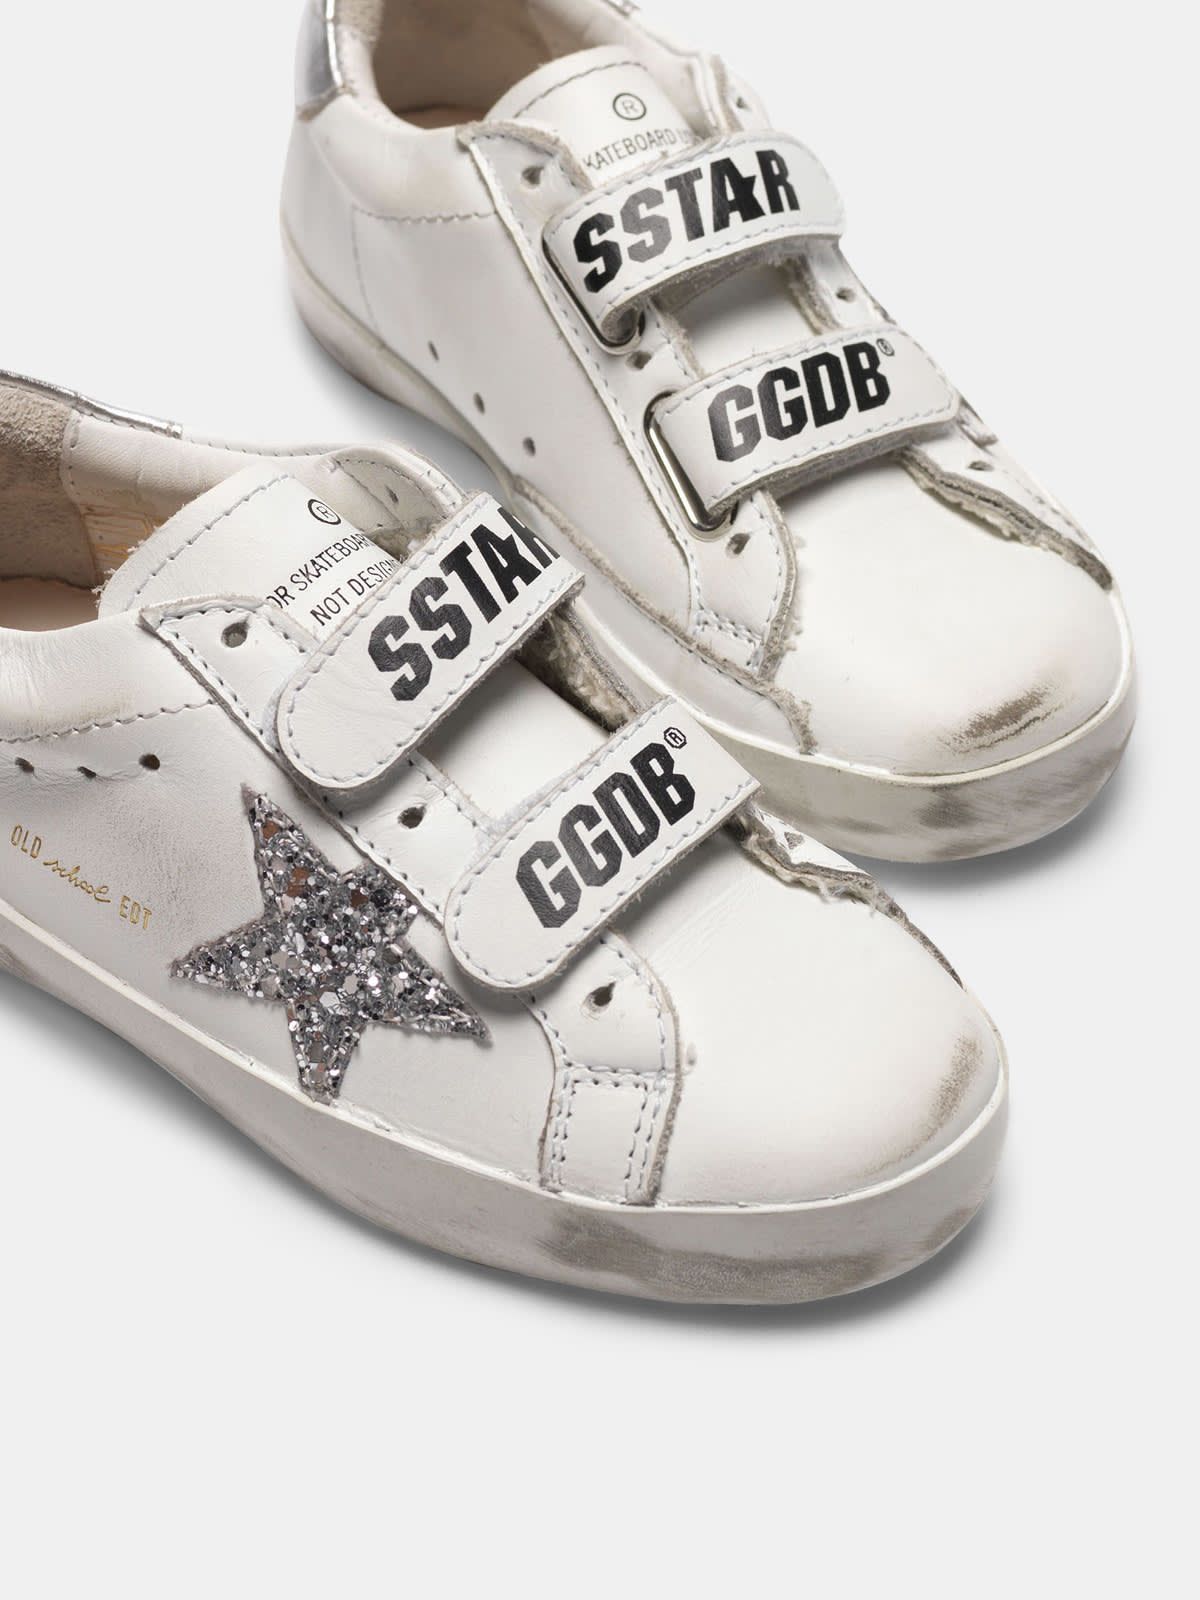 White Old School sneakers with glittery star and silver heel tab